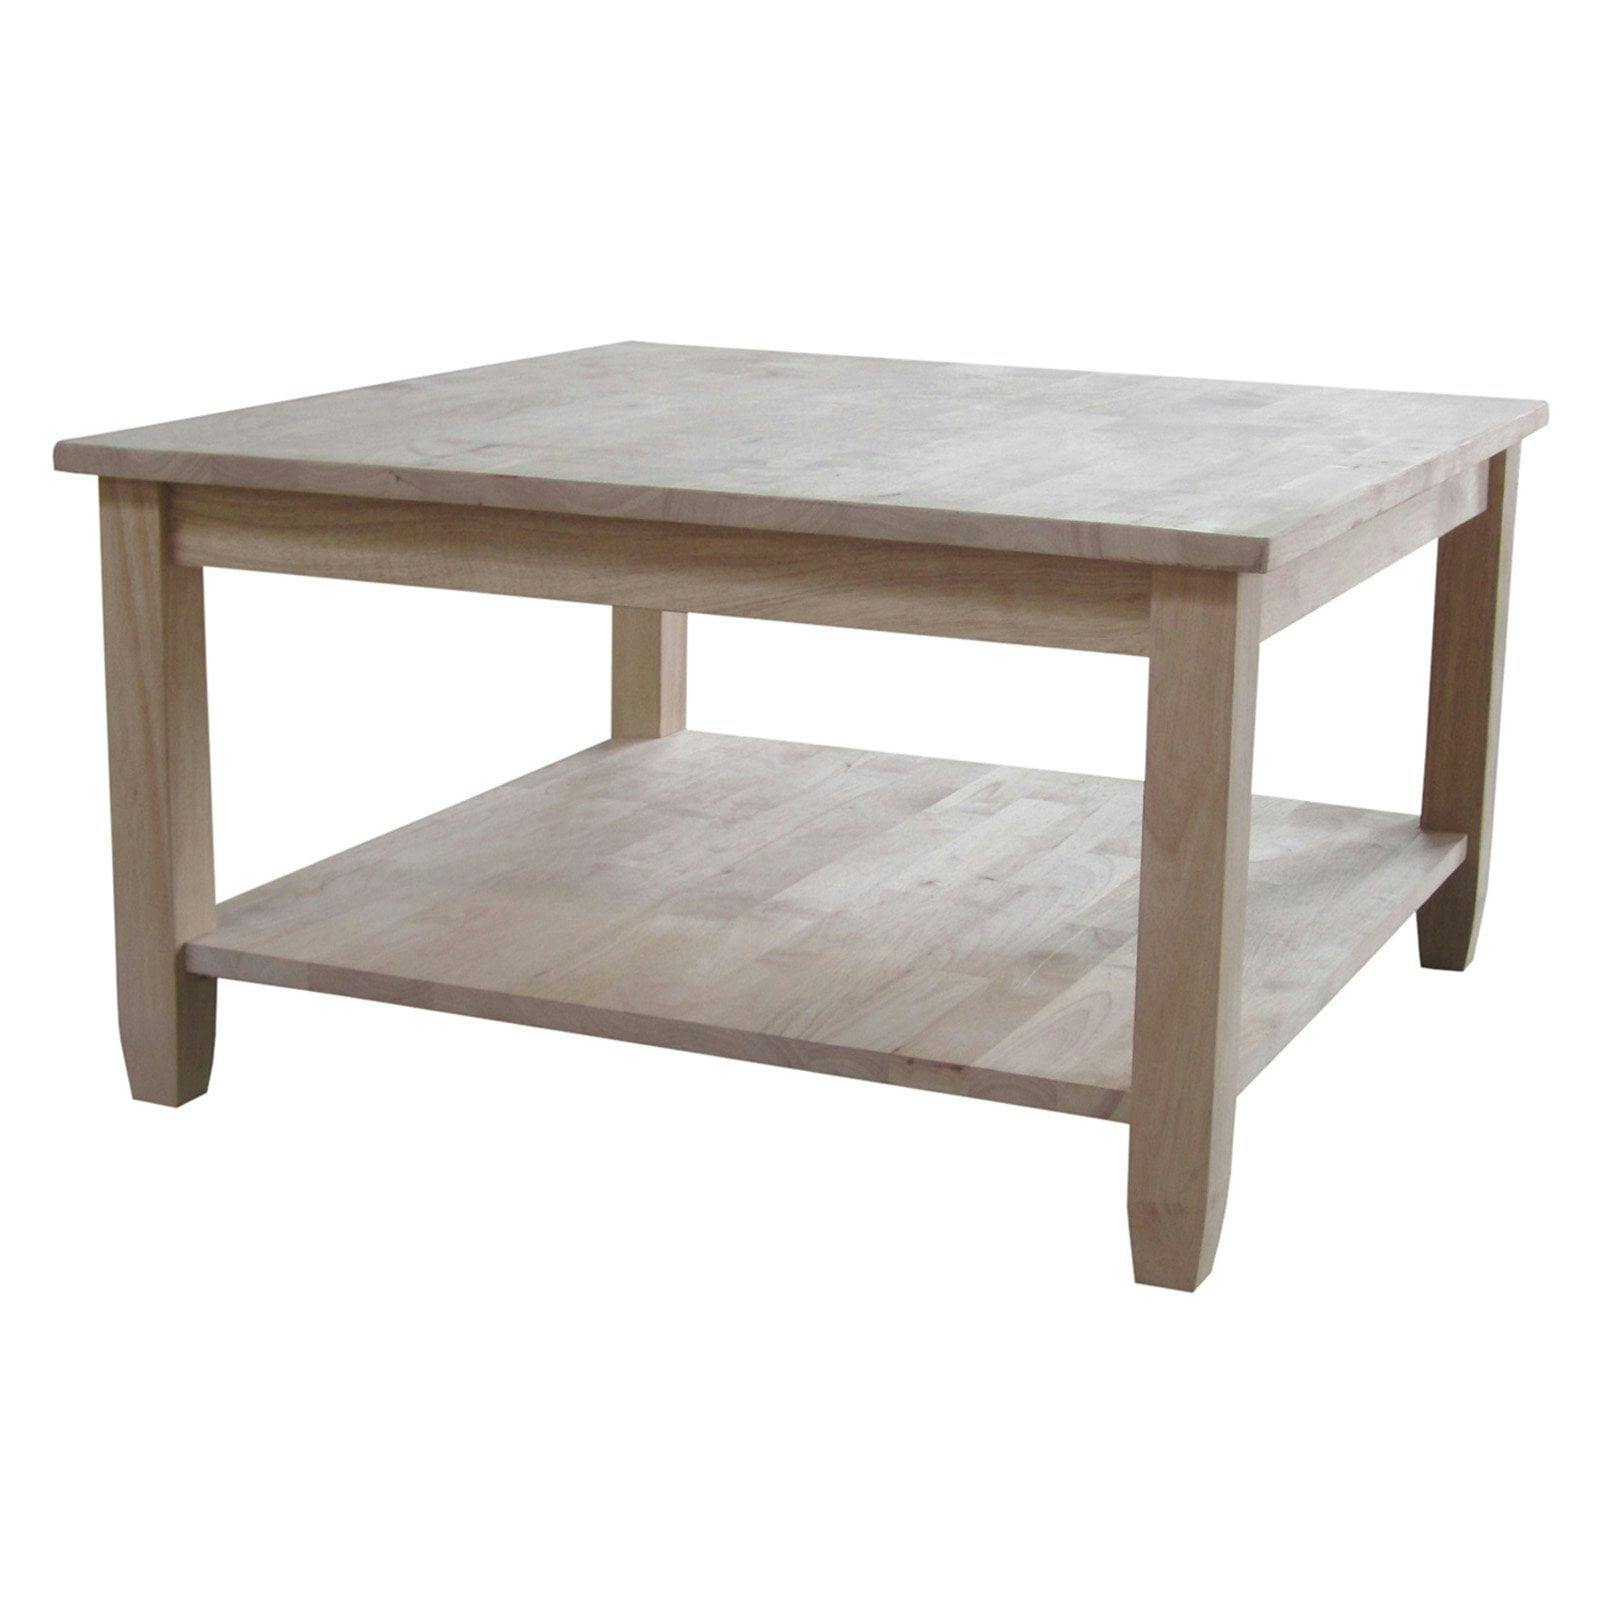 Solano Unfinished Parawood 35" Square Coffee Table